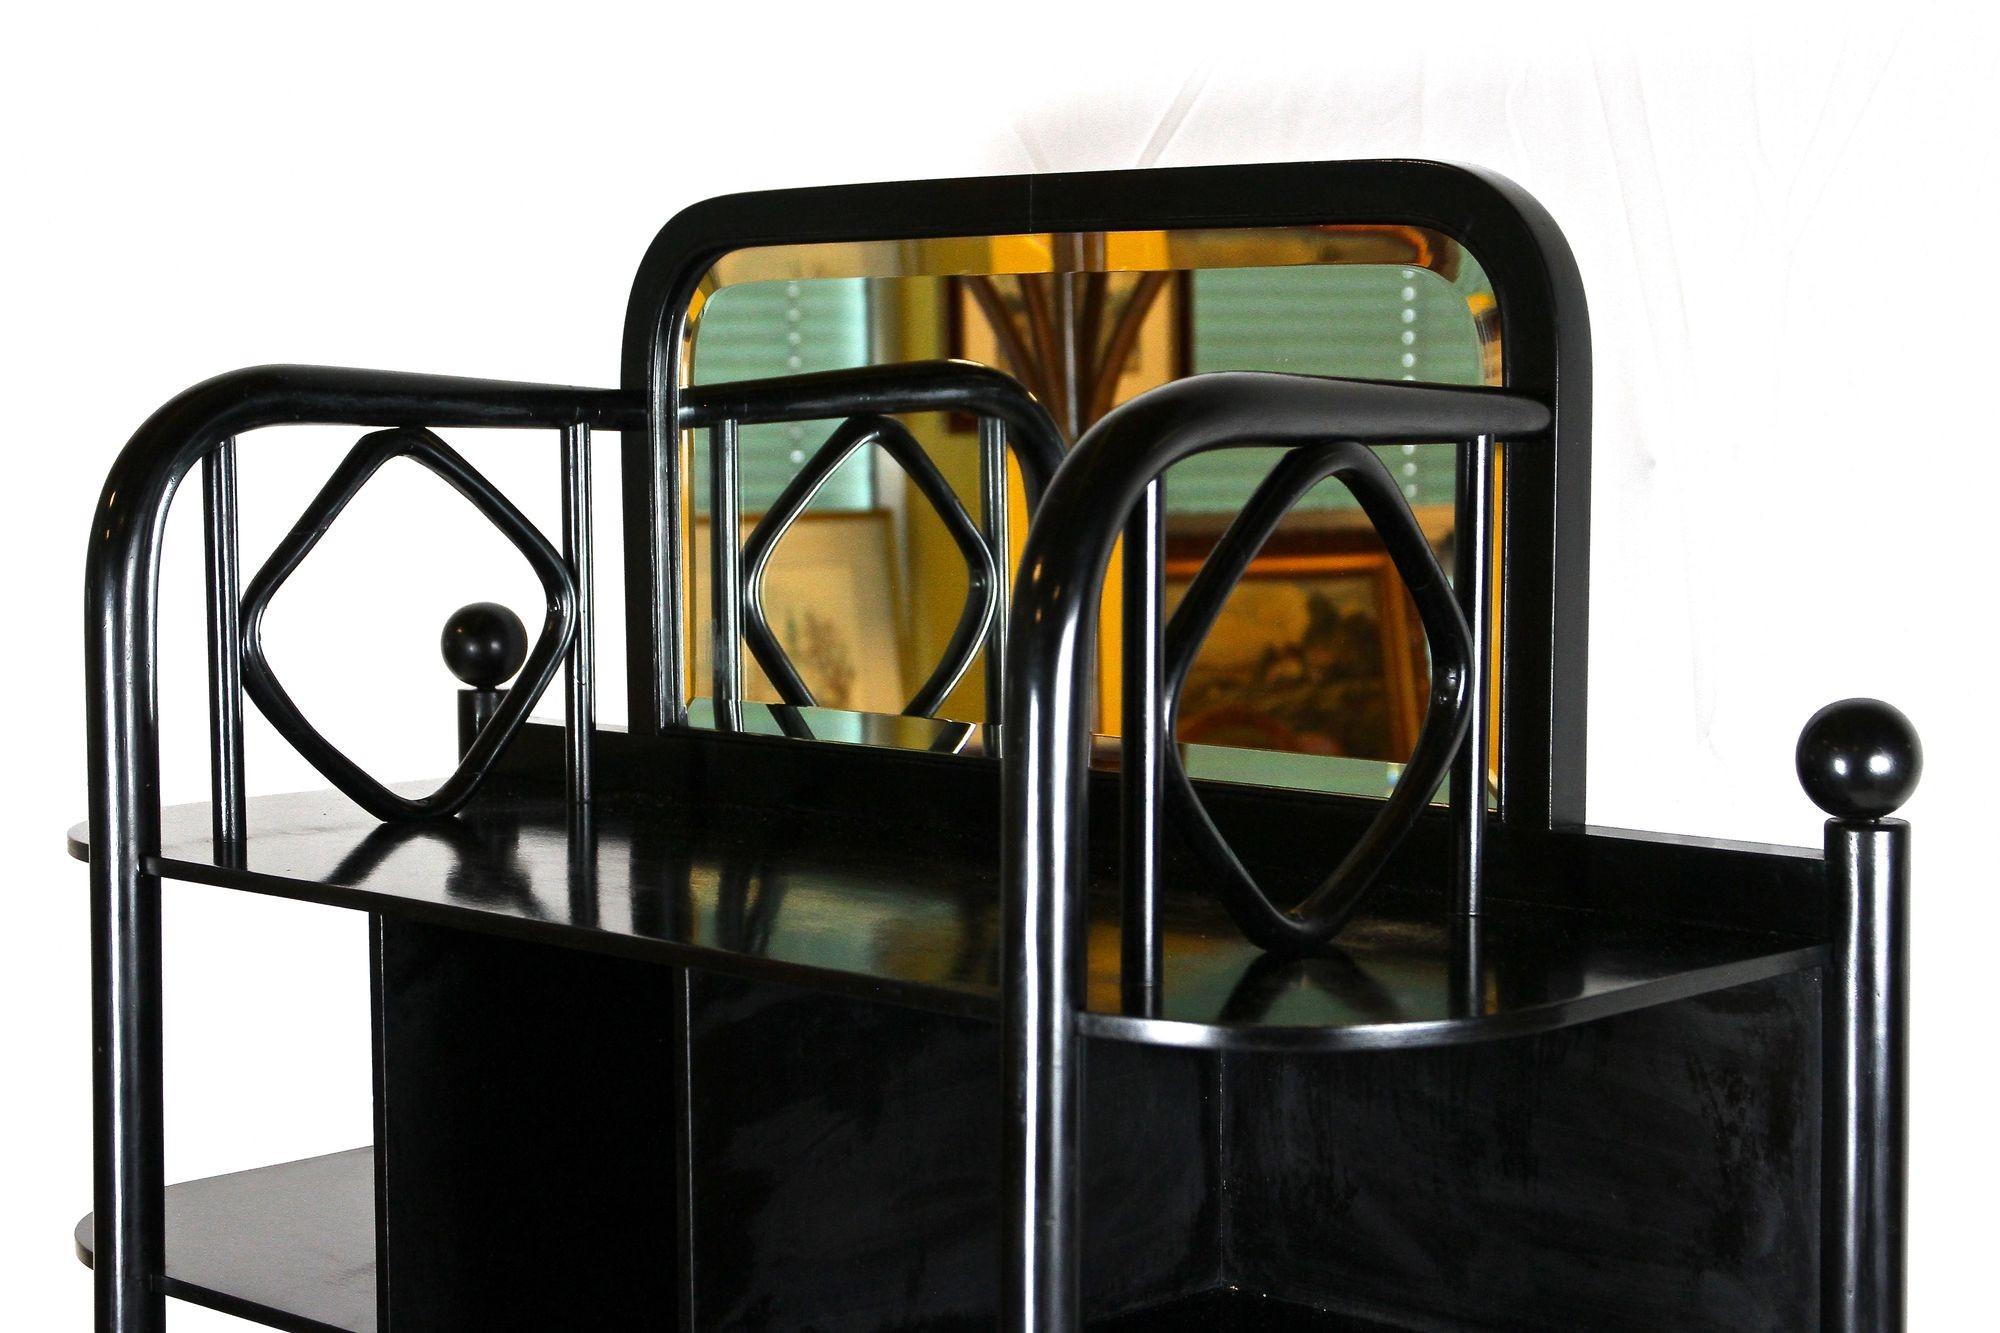 Black Art Nouveau Display Cabinet by Josef Hoffmann for Thonet, AT ca. 1905 For Sale 4